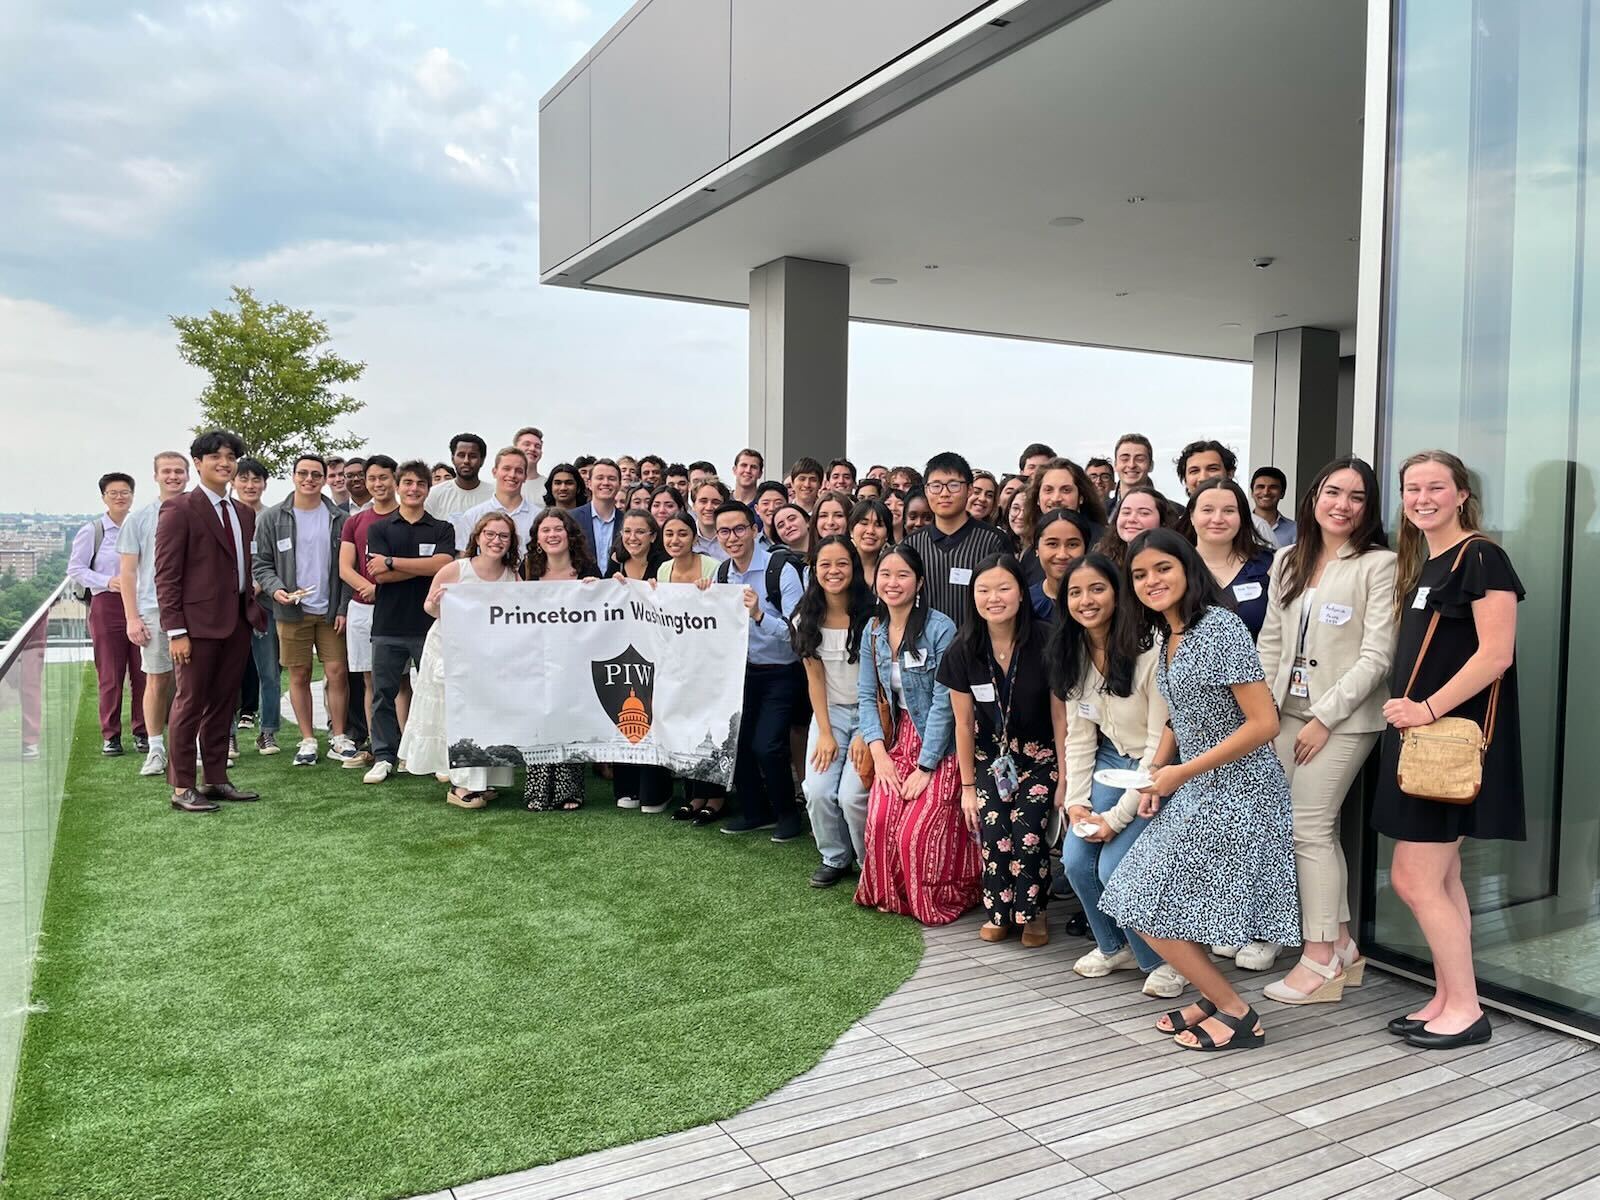 large group of students poses with 'Princeton in Washington' banner